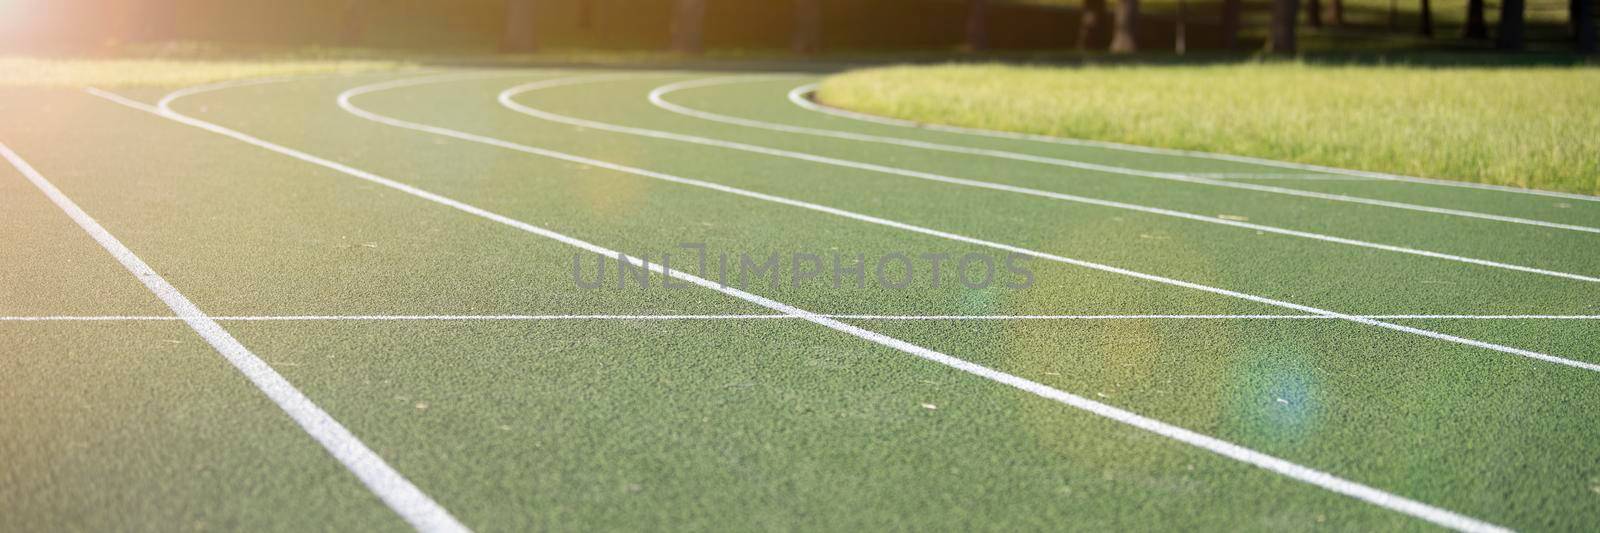 Running track at the stadium. Rubber coated green. Running track in the park outdoors, summer.